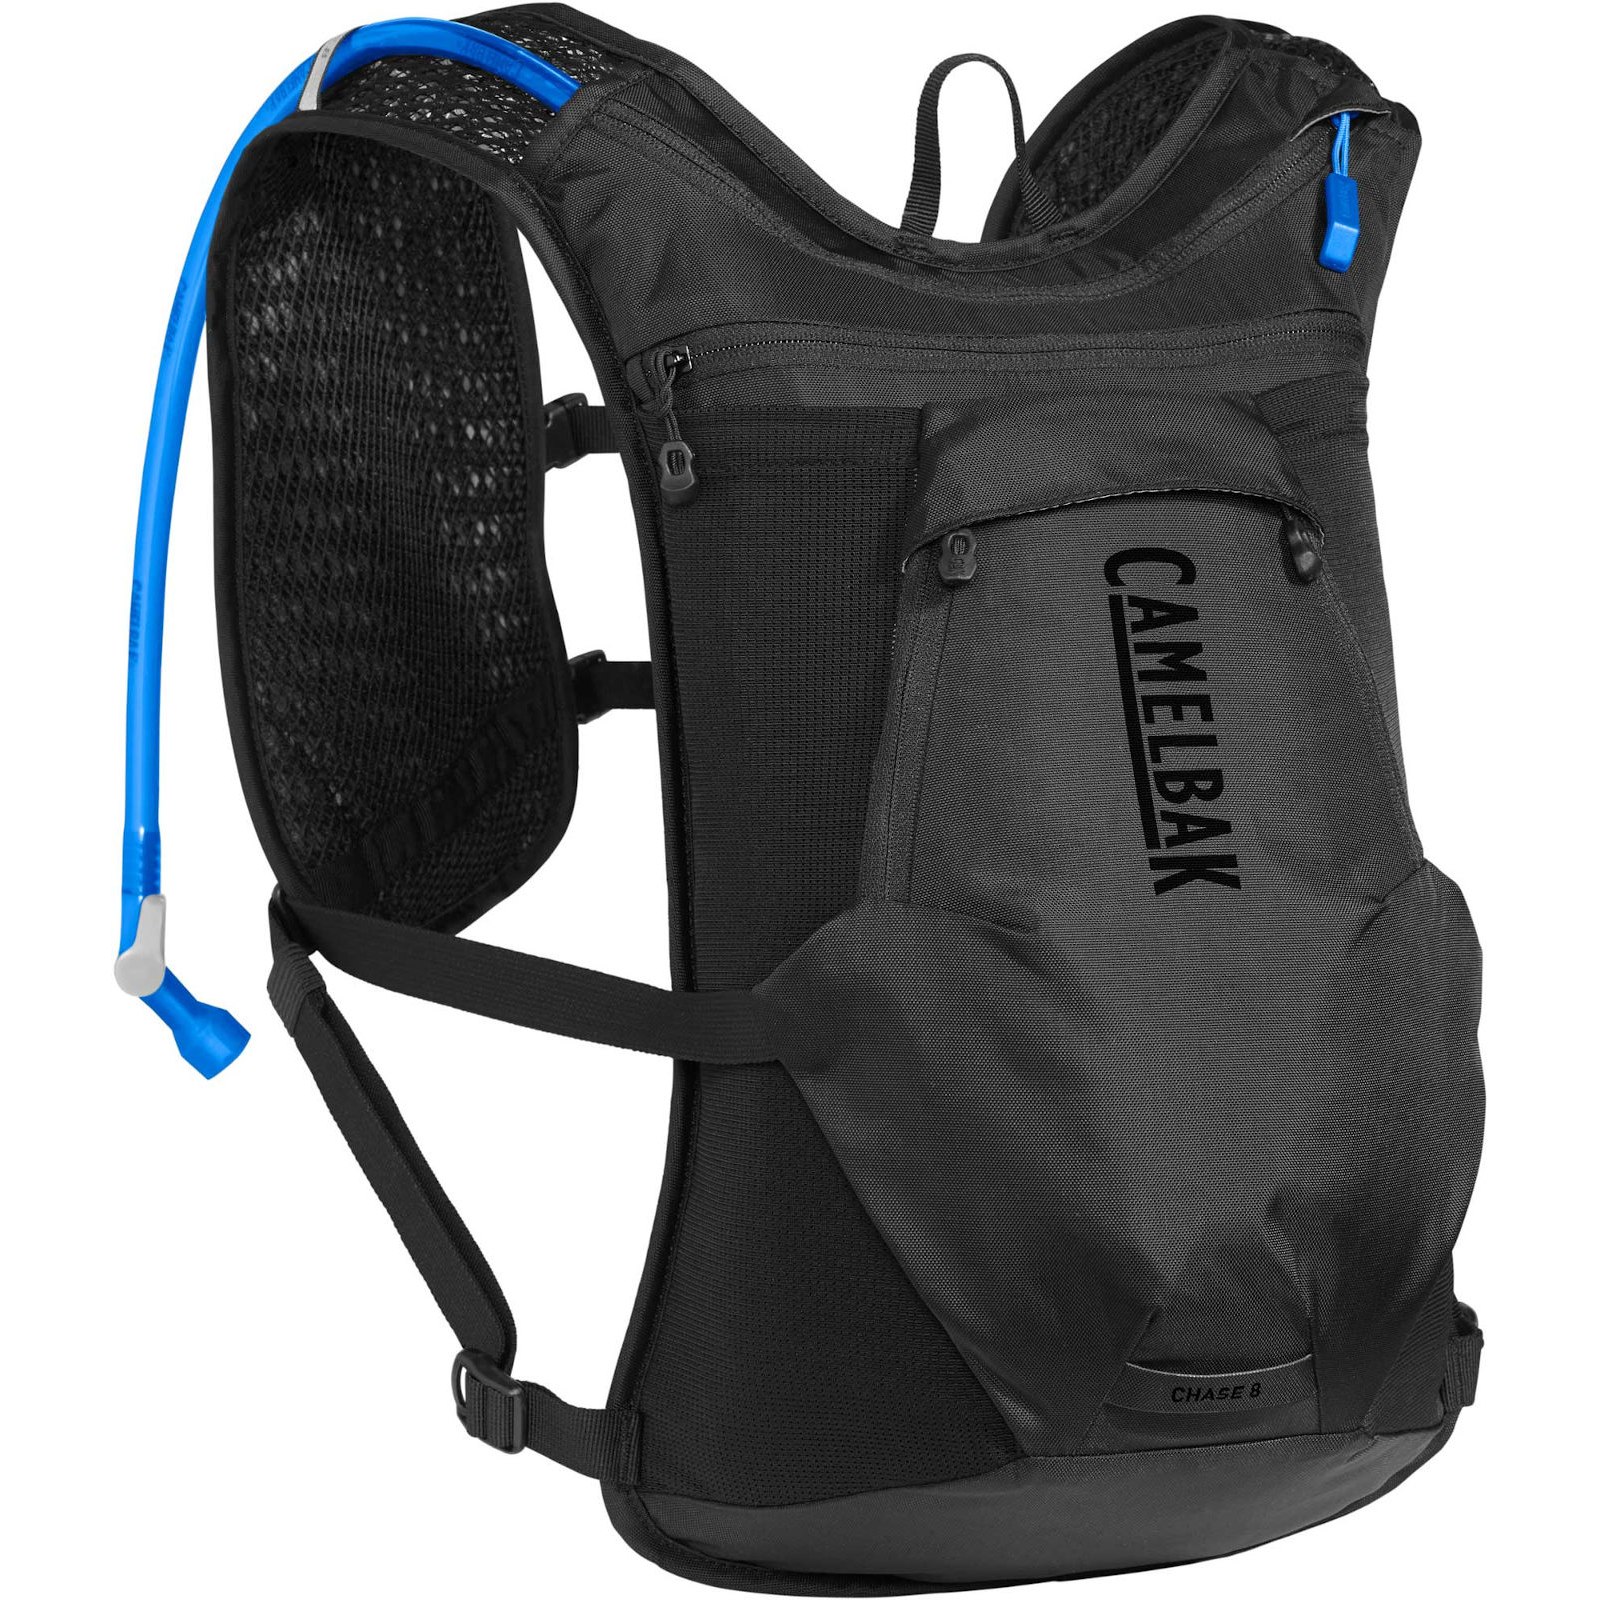 Picture of CamelBak Chase 8 Bike Vest + Hydration Pack - Black